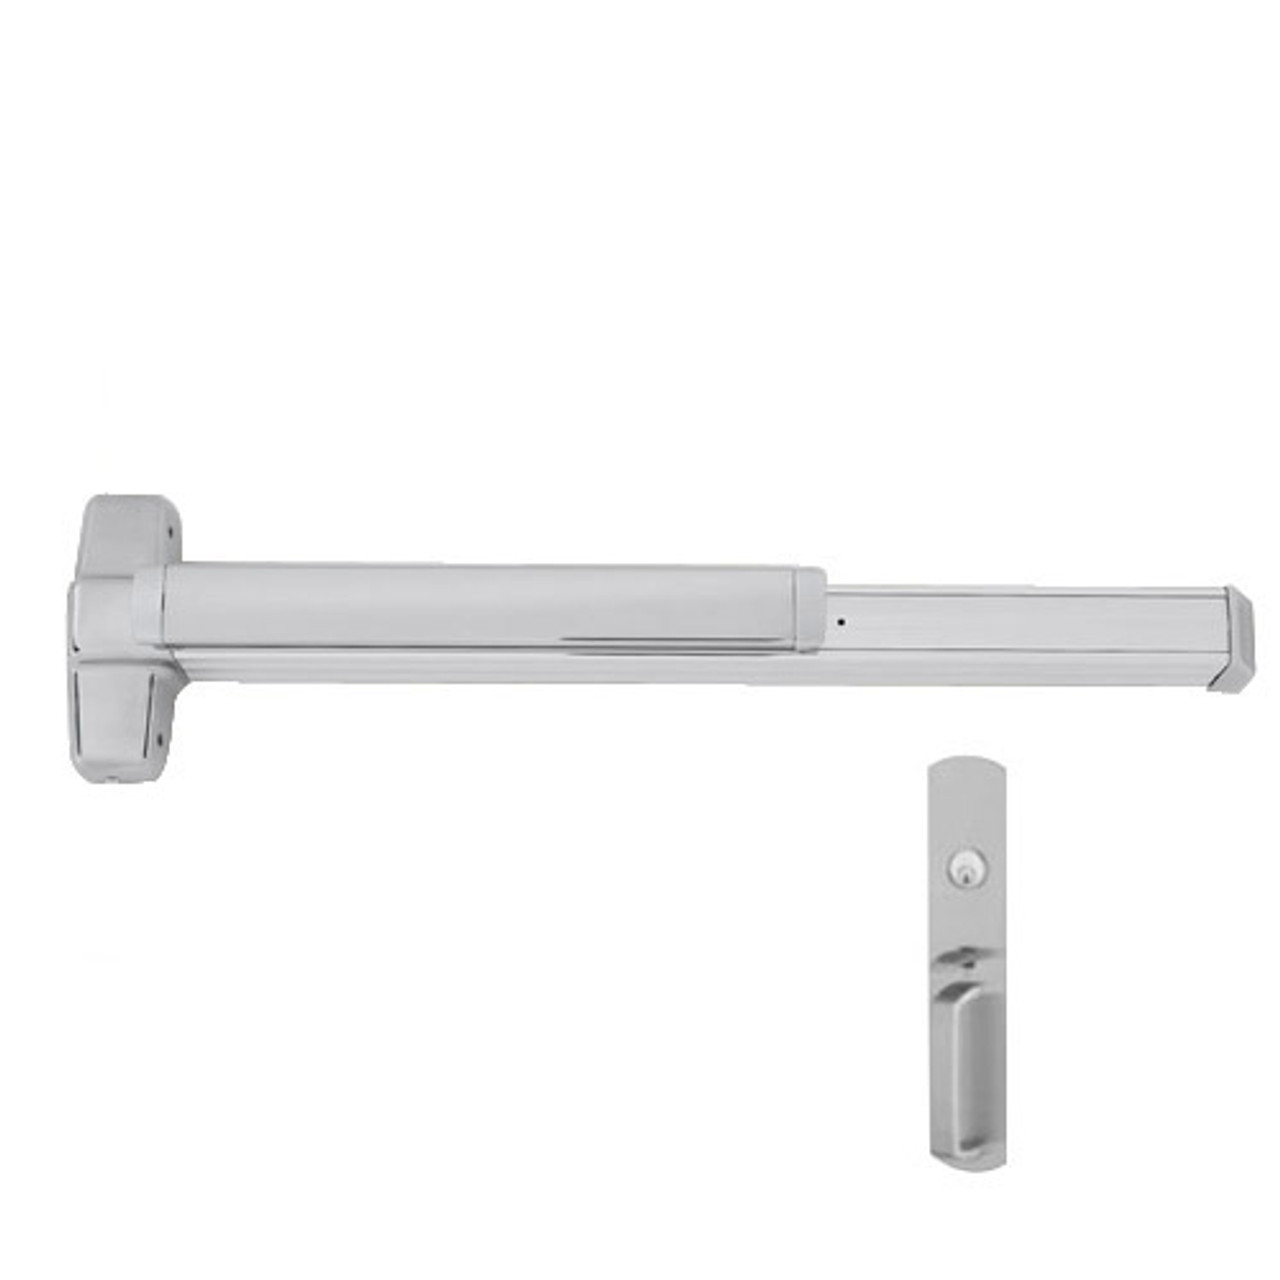 EL9847WDC-TP-US32D-3 Von Duprin Exit Device with Electric Latch Retraction in Satin Stainless